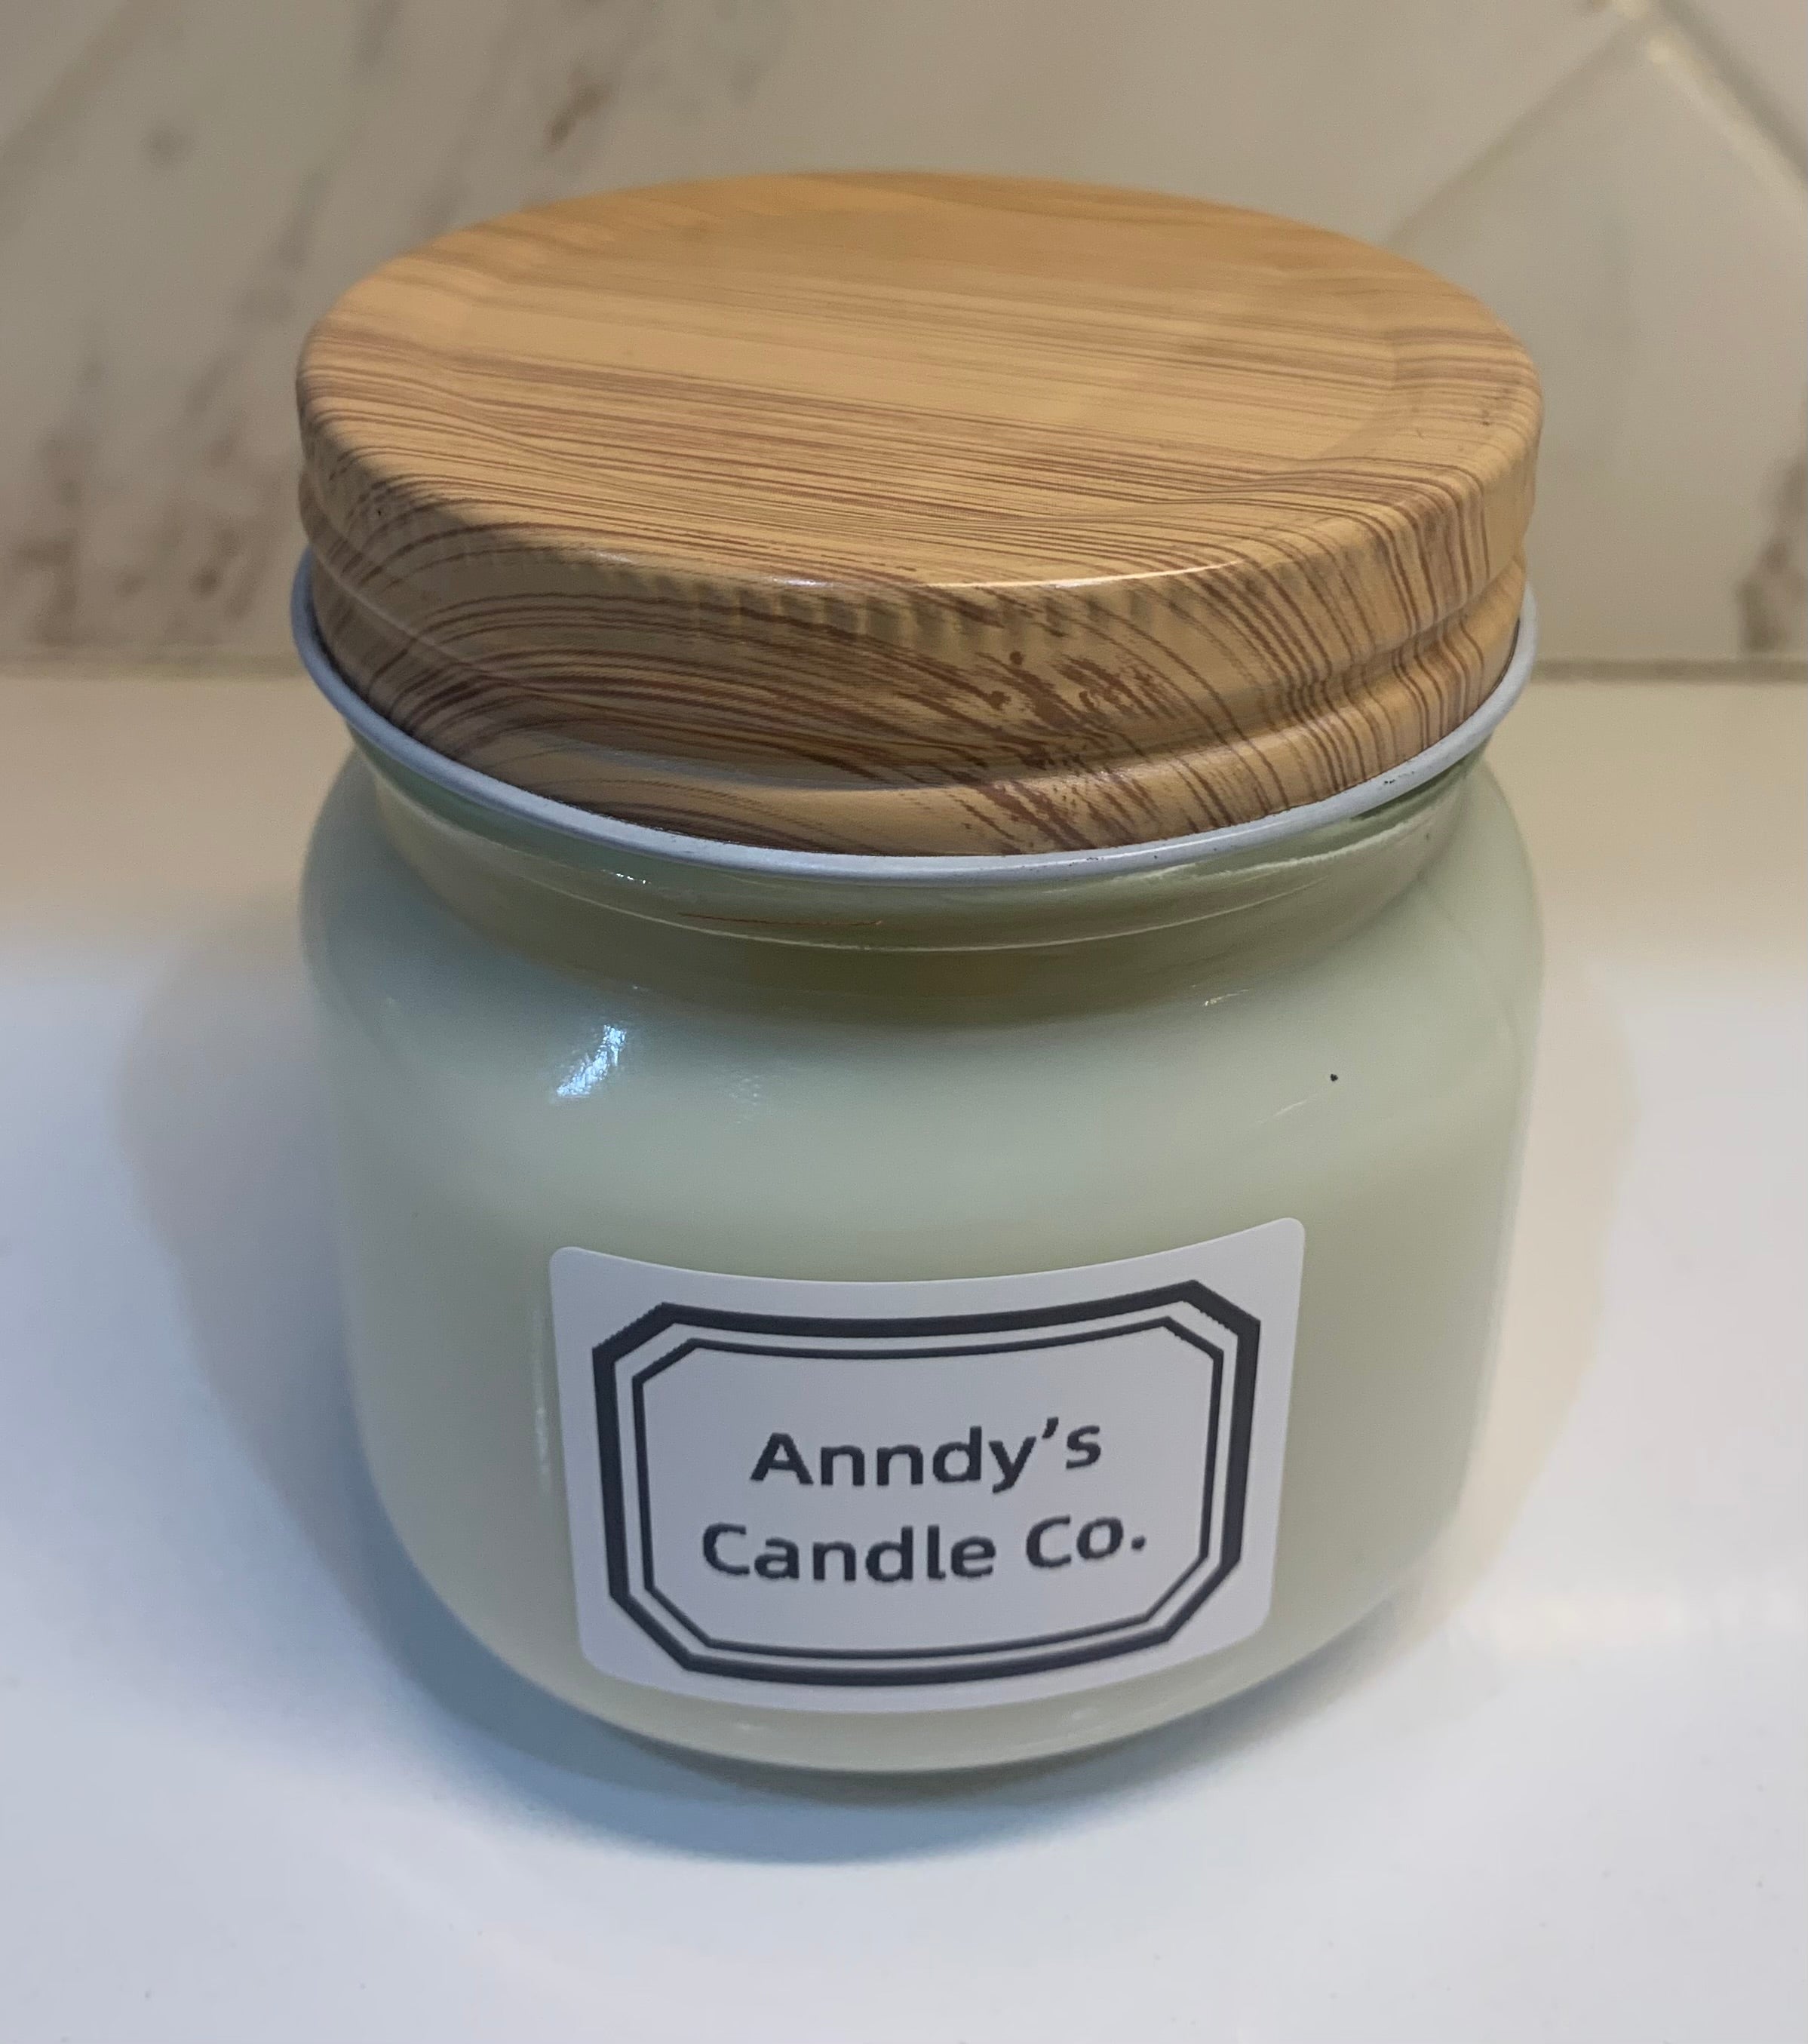 Anndy's Candle Co. Glass Candles